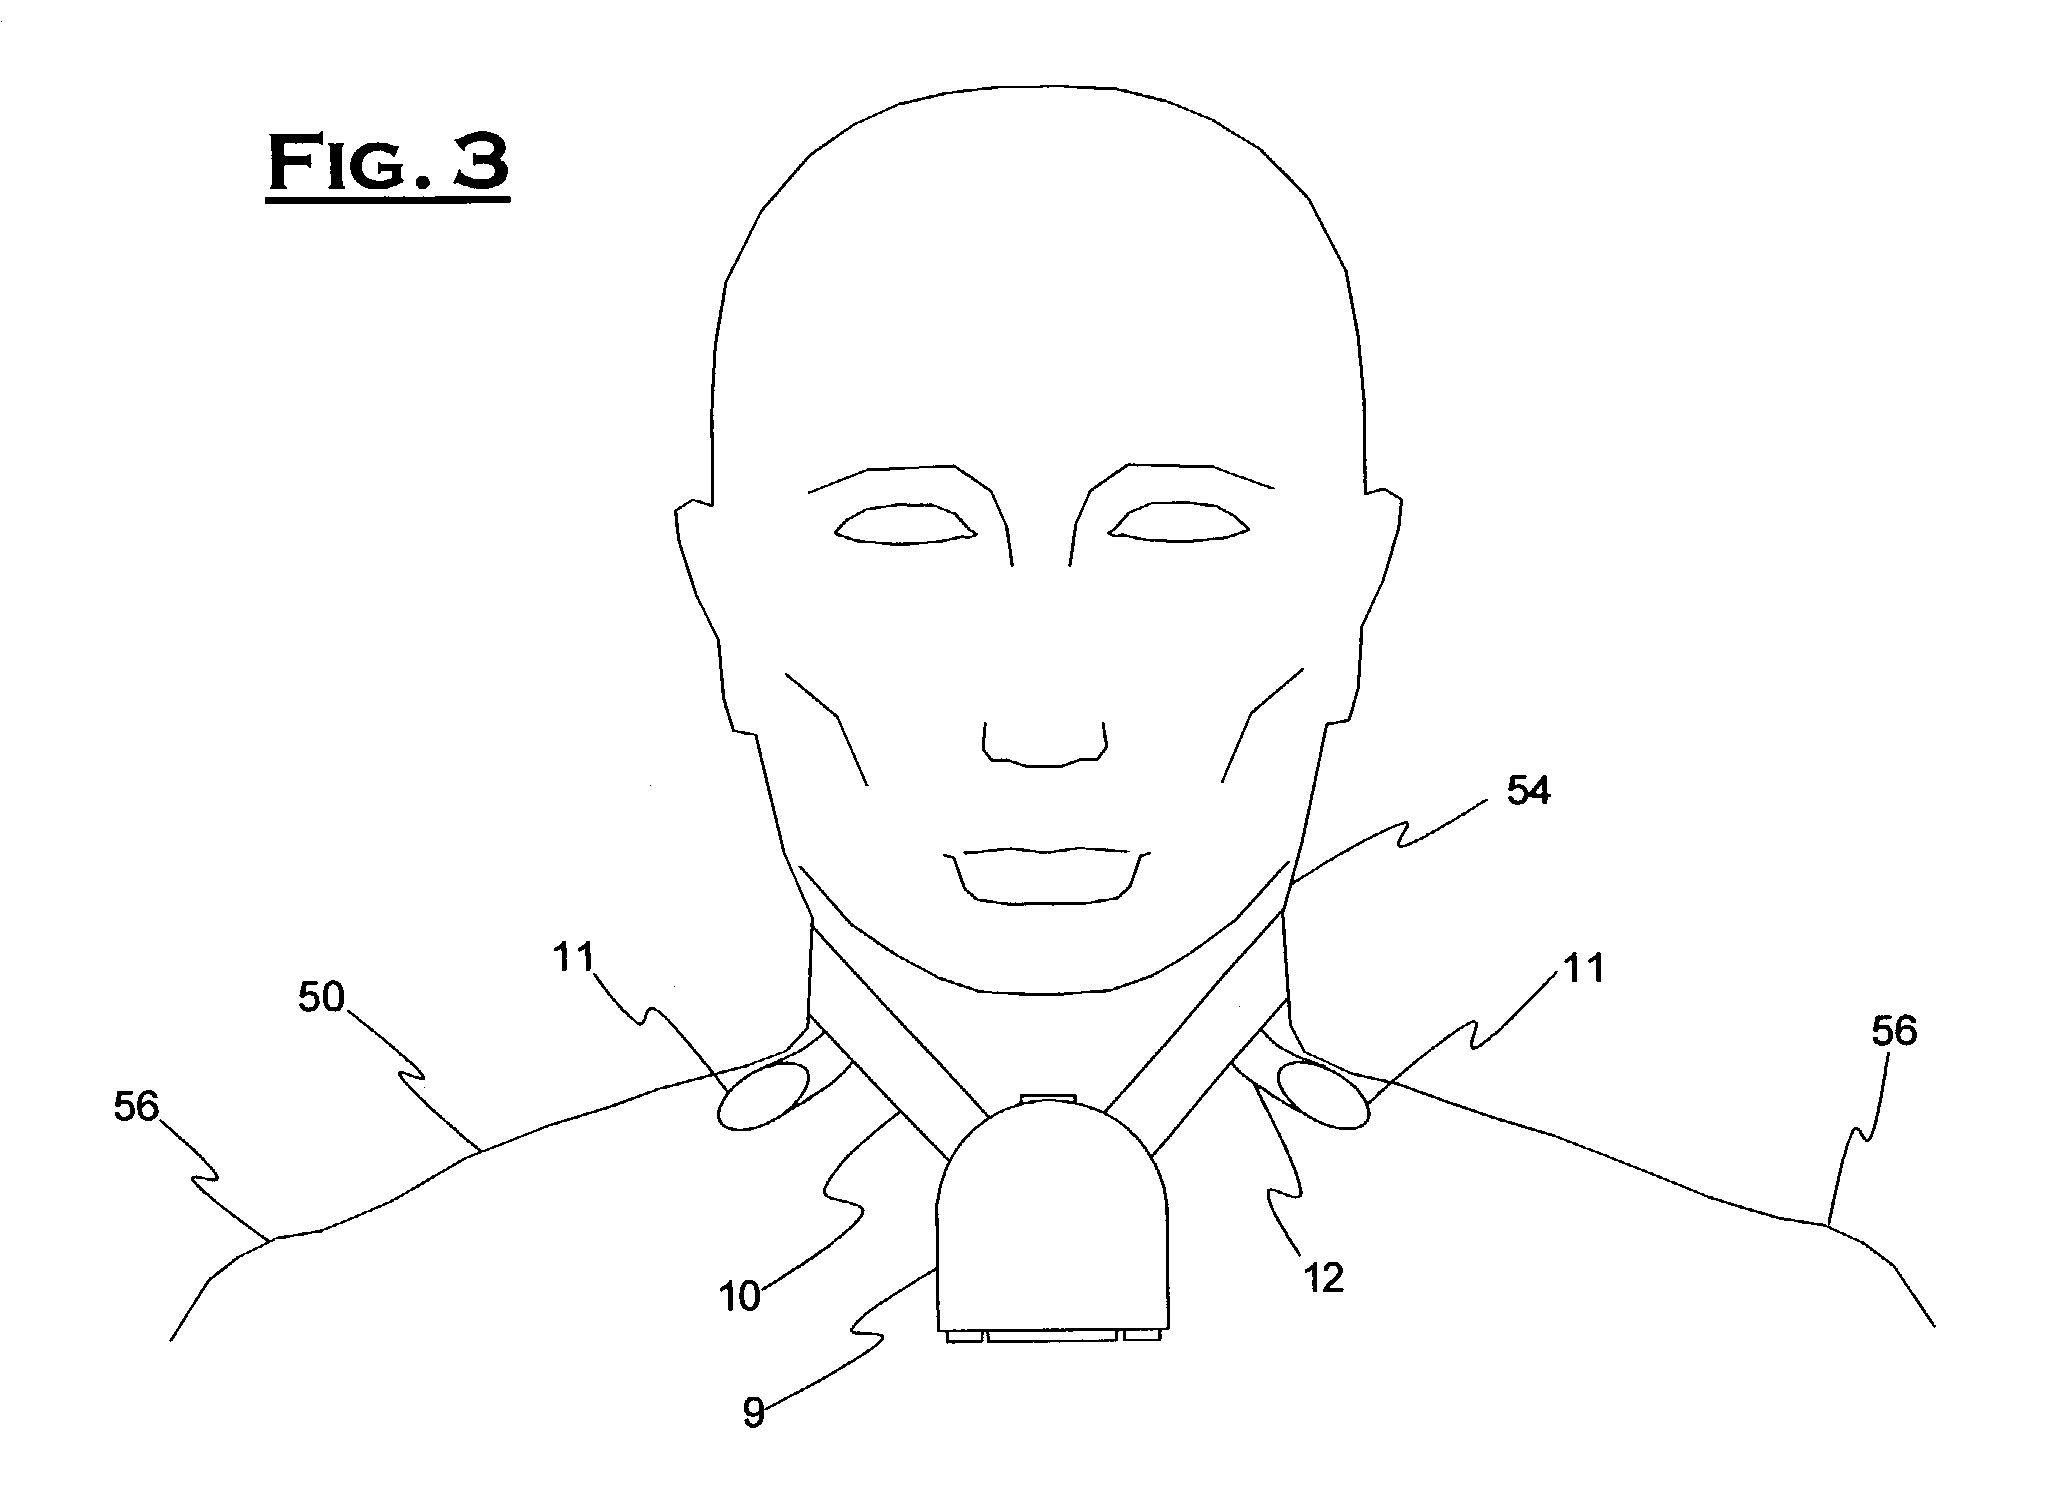 Patient-worn medical monitoring device